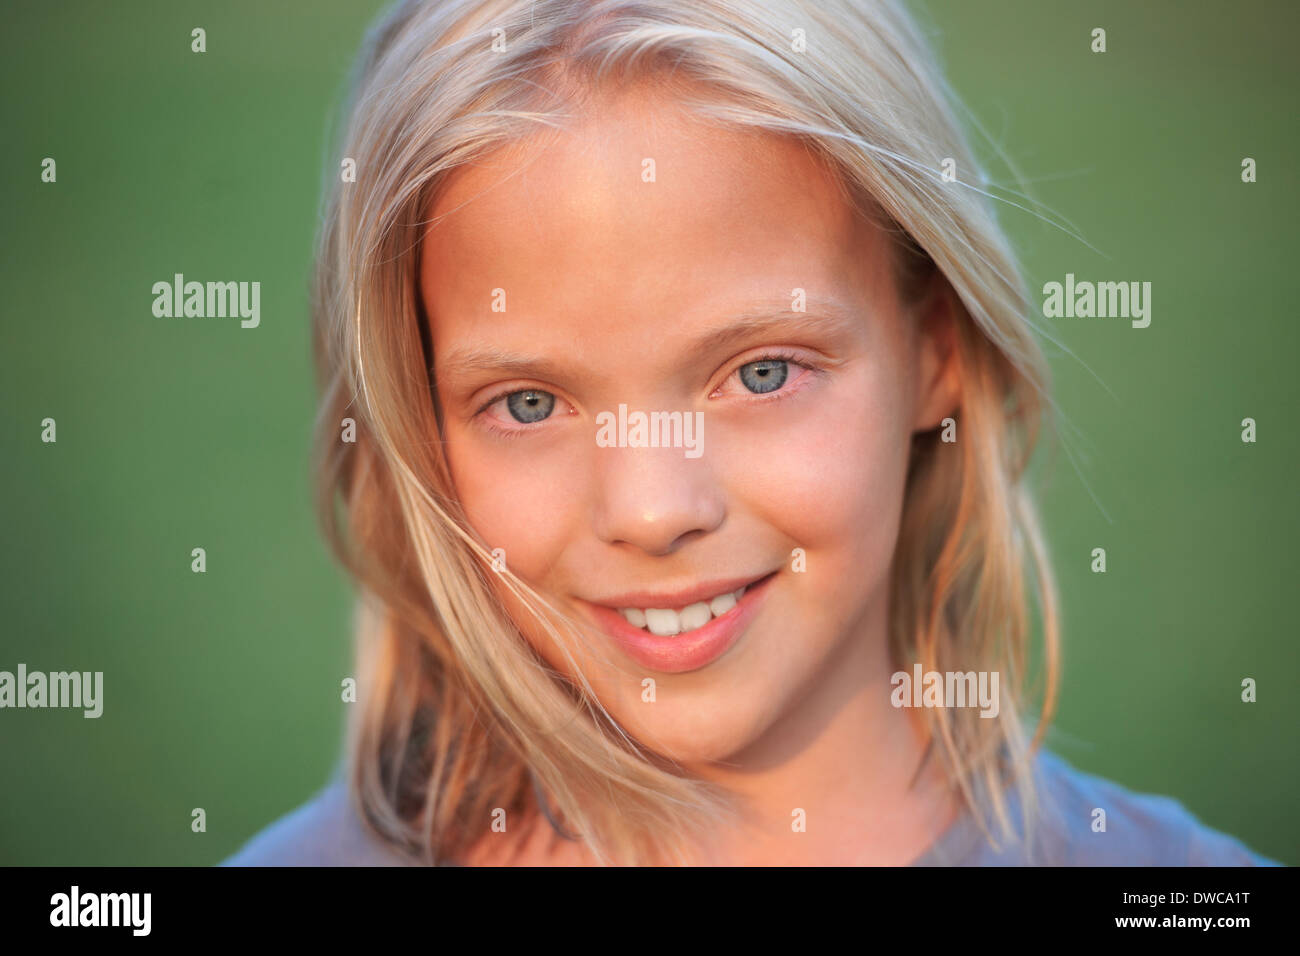 Close up Portrait of Girl with Blonde hair Banque D'Images